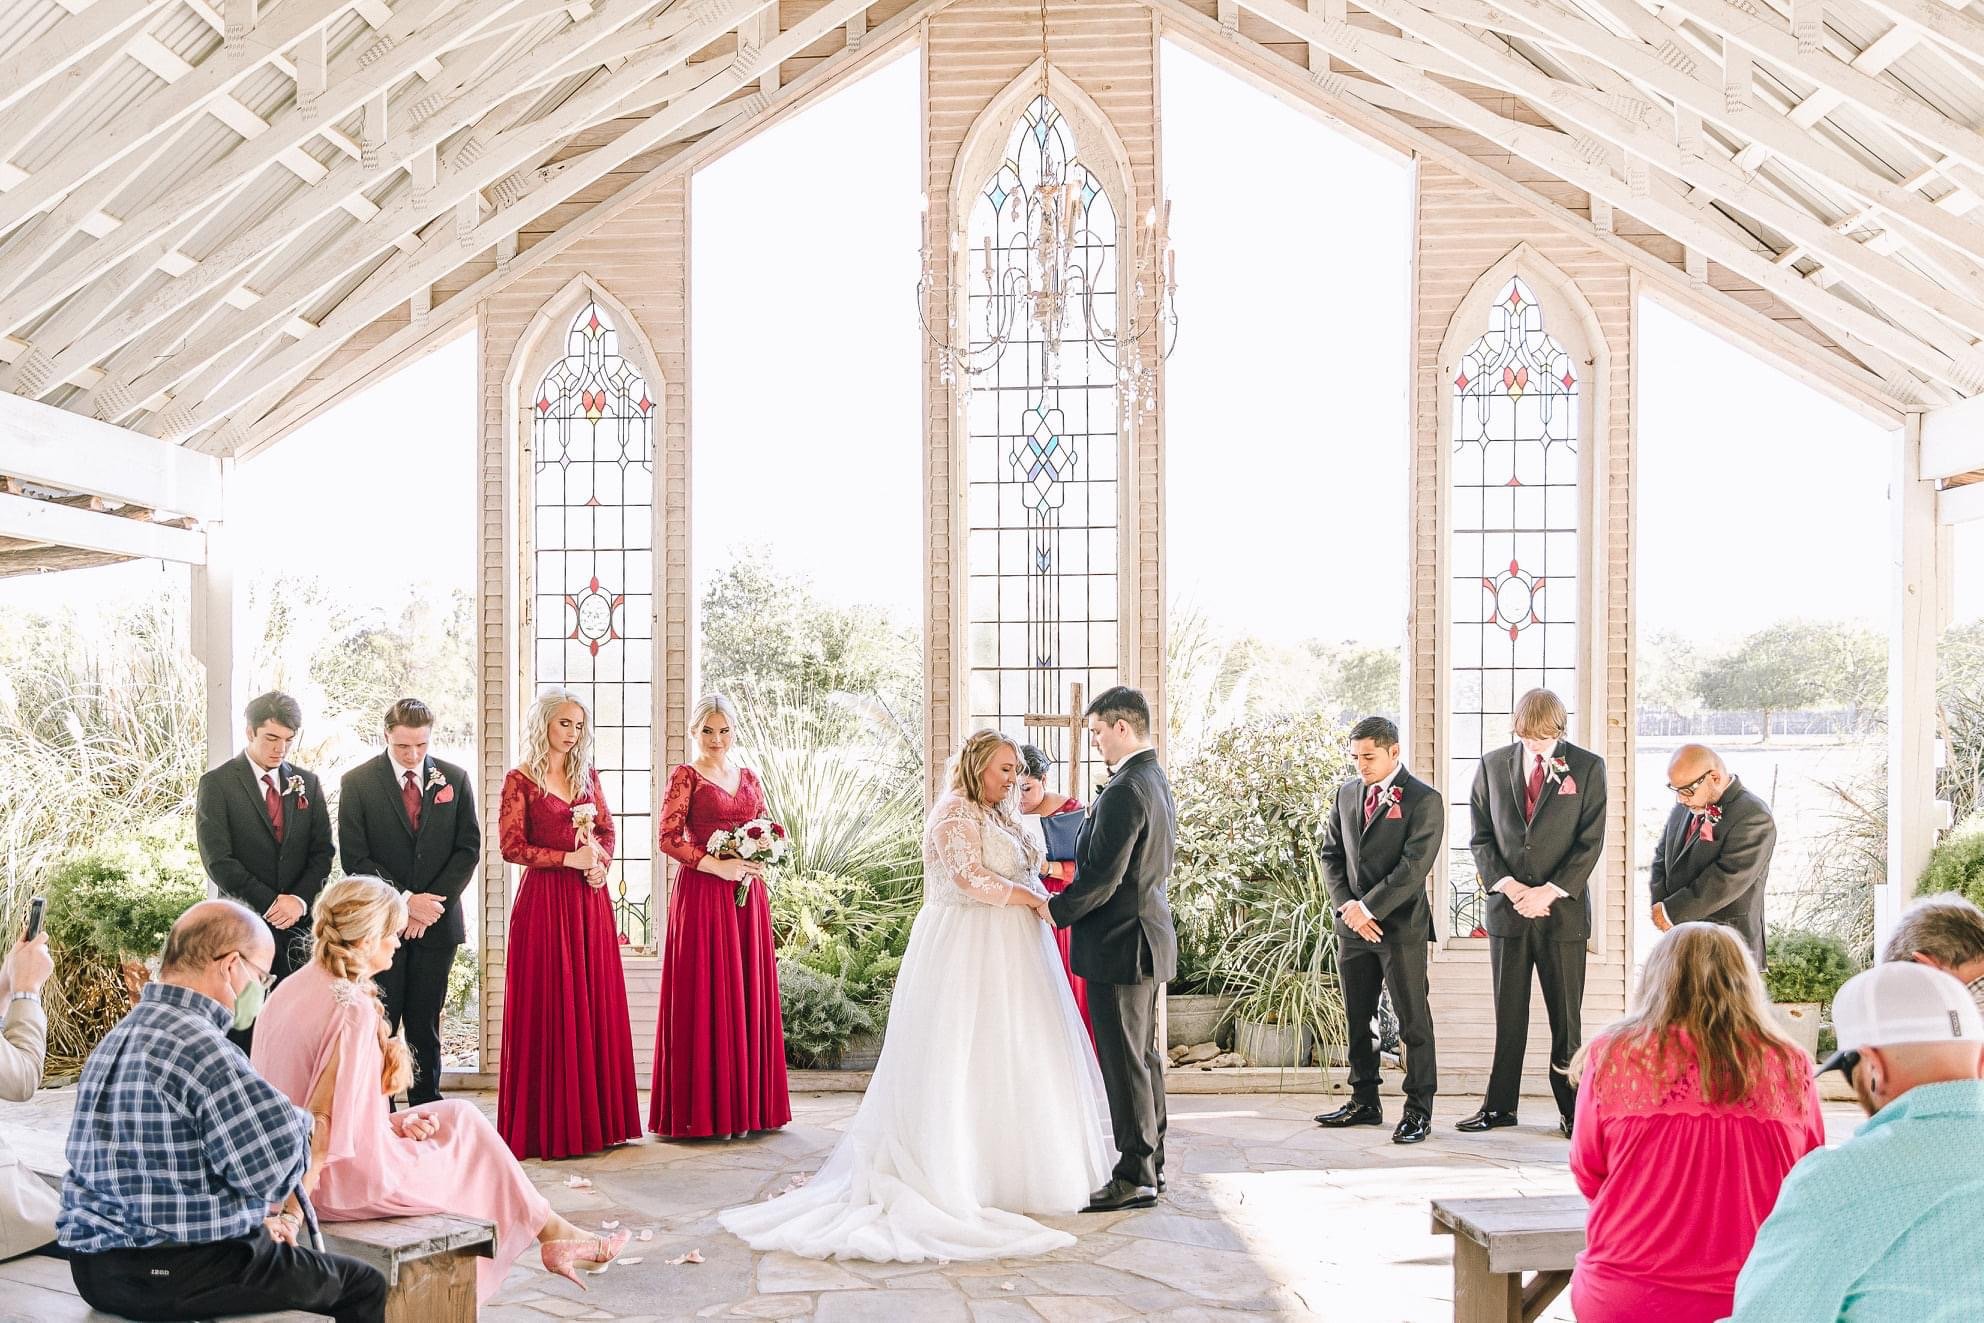 Gruene Estate Event Venue Officiated by The Love Officiant Renee Reyes